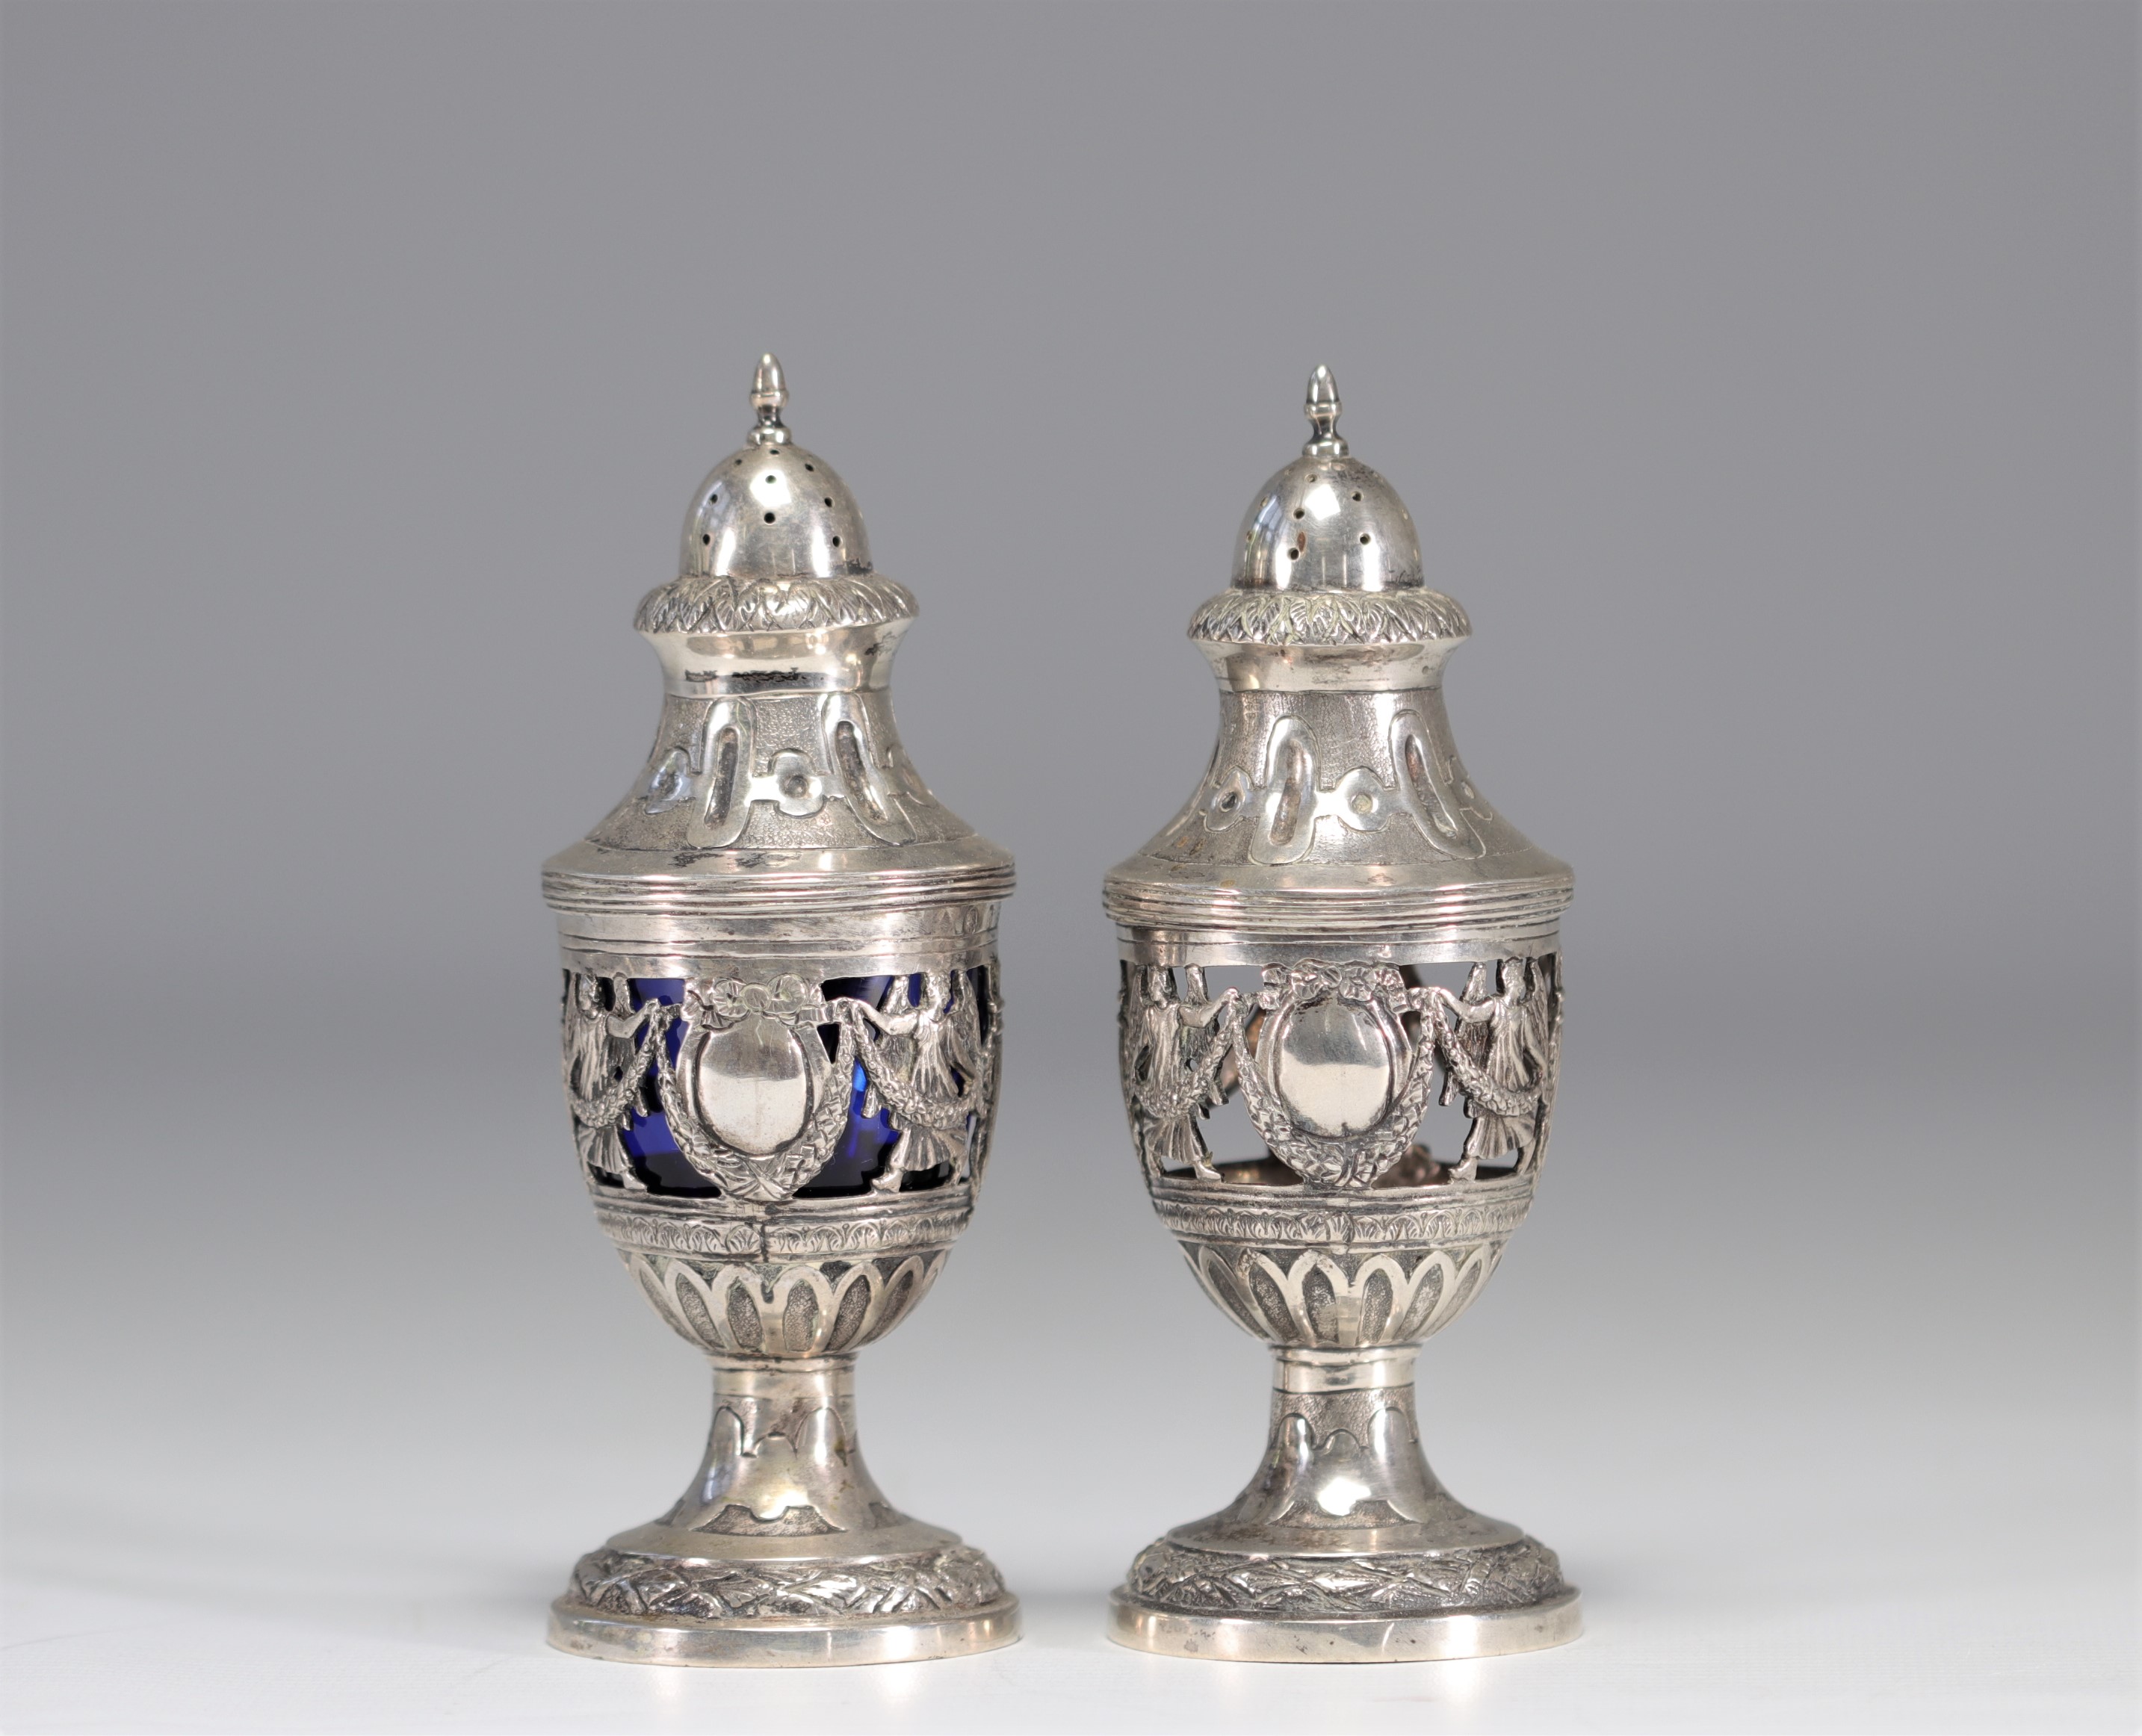 Solid silver sprinklers with Reims hallmarks from the 18th century - Image 3 of 5